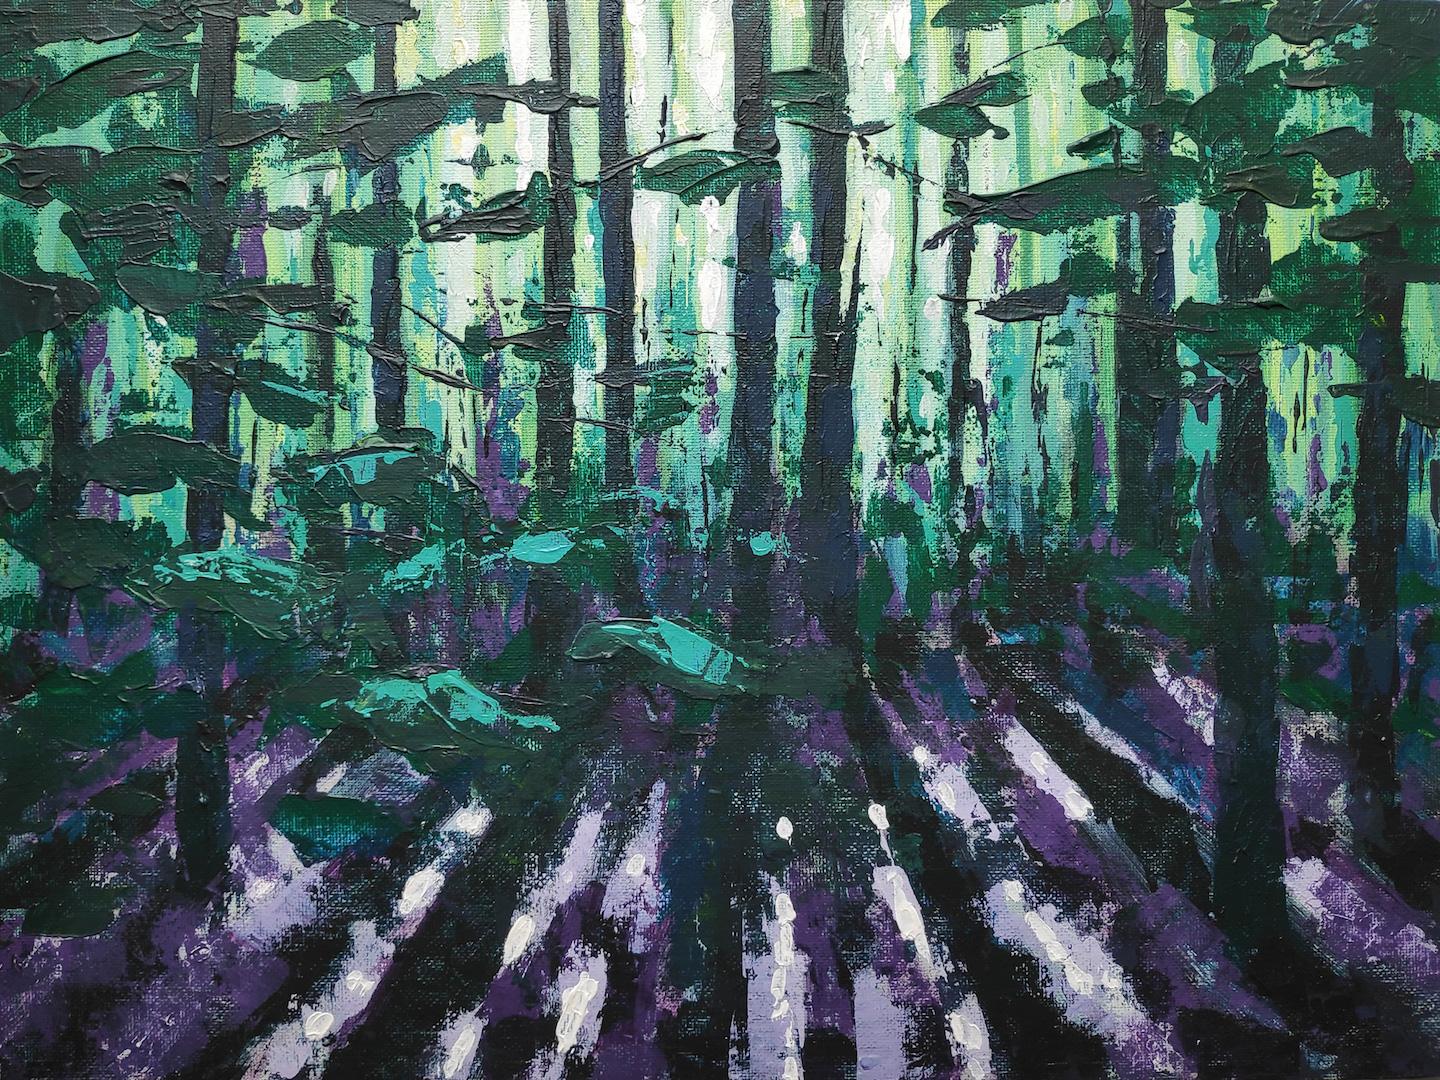 Alexandra Buckle
Summer Woodland Sight
Acrylic painting on canvas board
Sold unframed
Painting size: H 30 cm x W 40 cm x D 0.5 cm

(Please note that in situ images are purely an indication of how a piece may look).

Summer Woodland Sight is an